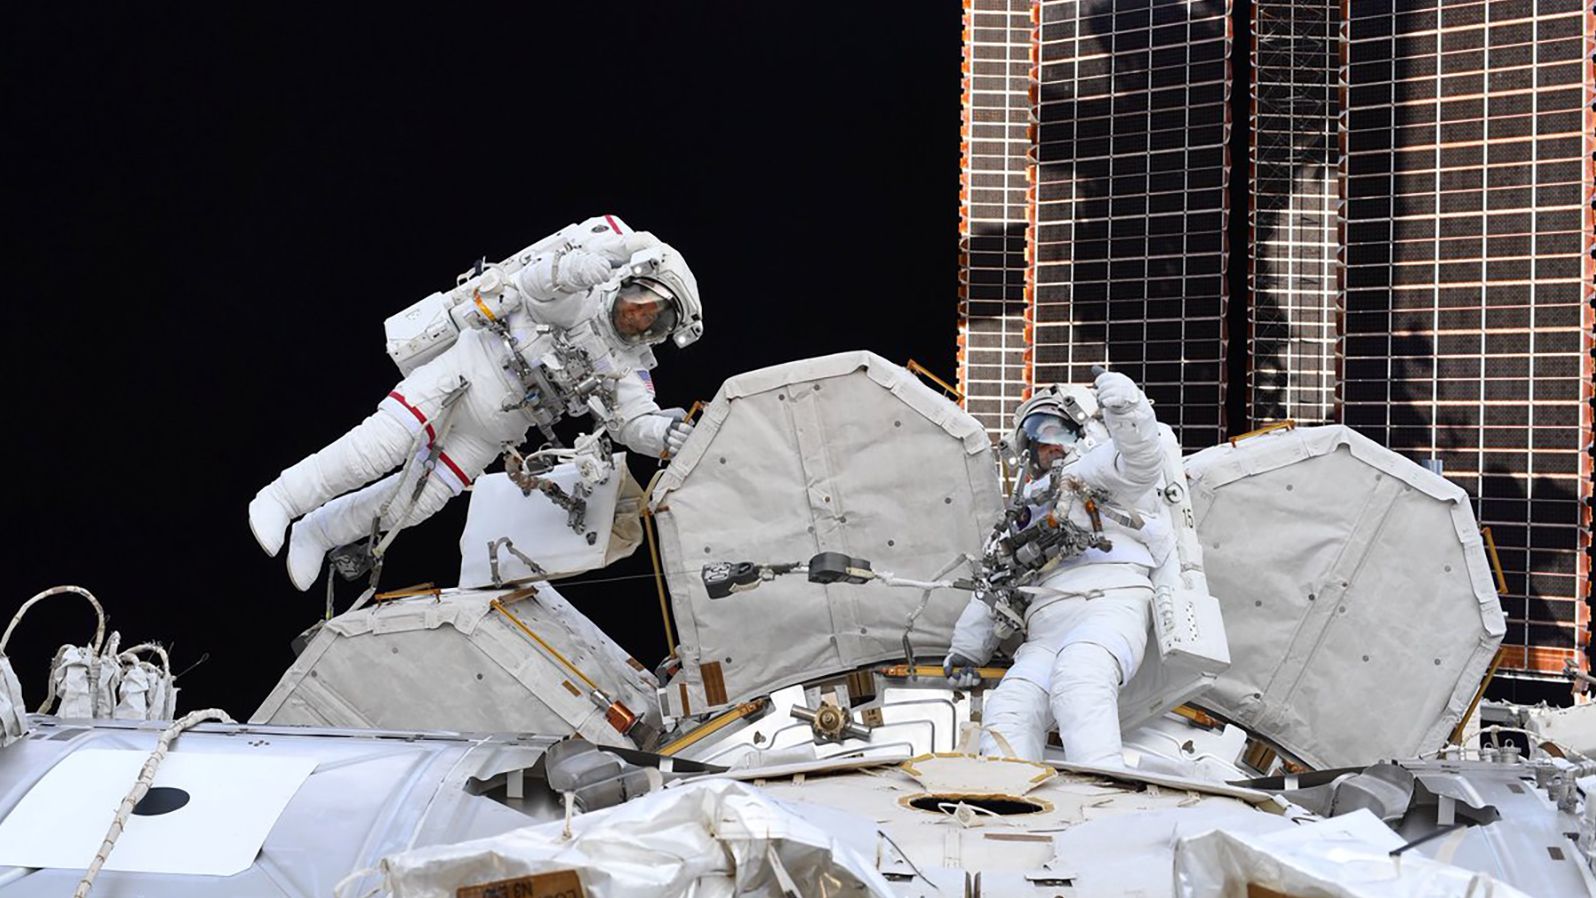 On July 21, Hurley tweeted: "Two of the best ever Spacewalkers, each on their 10th EVA today. Congratulations on an amazing accomplishment @Astro_SEAL and @AstroBehnken!" Behnken was joined by NASA astronaut Chris Cassidy.